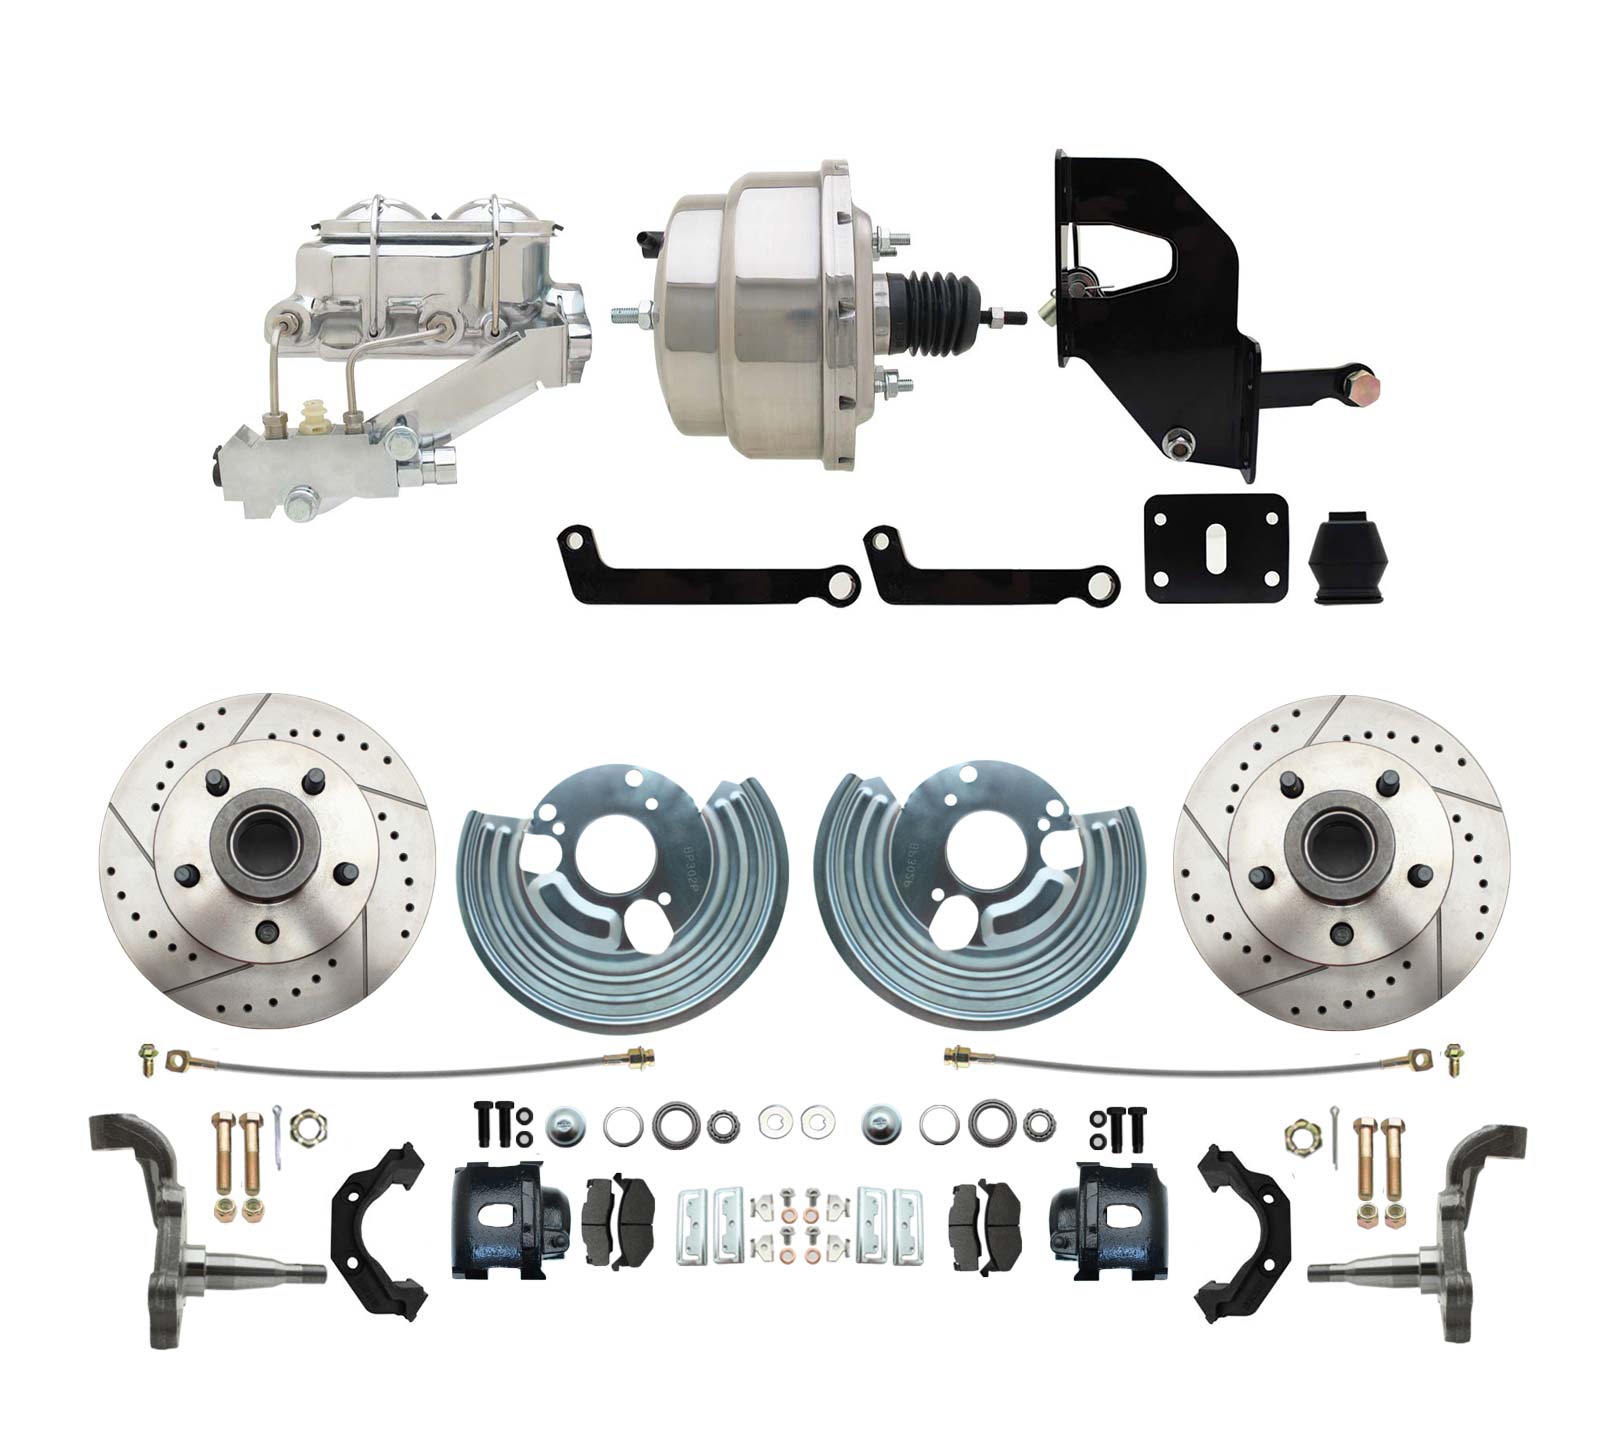 1962-1972 Mopar B & E Body  Front  Disc Brake Conversion Kit W/ Drilled & Slotted Rotors & Powder Coated Black Calipers ( Charger, Challenger, Coronet) W/ 8 Dual Chrome Booster Conversion Kit W/ Dual Bail Chrome Master Cylinder